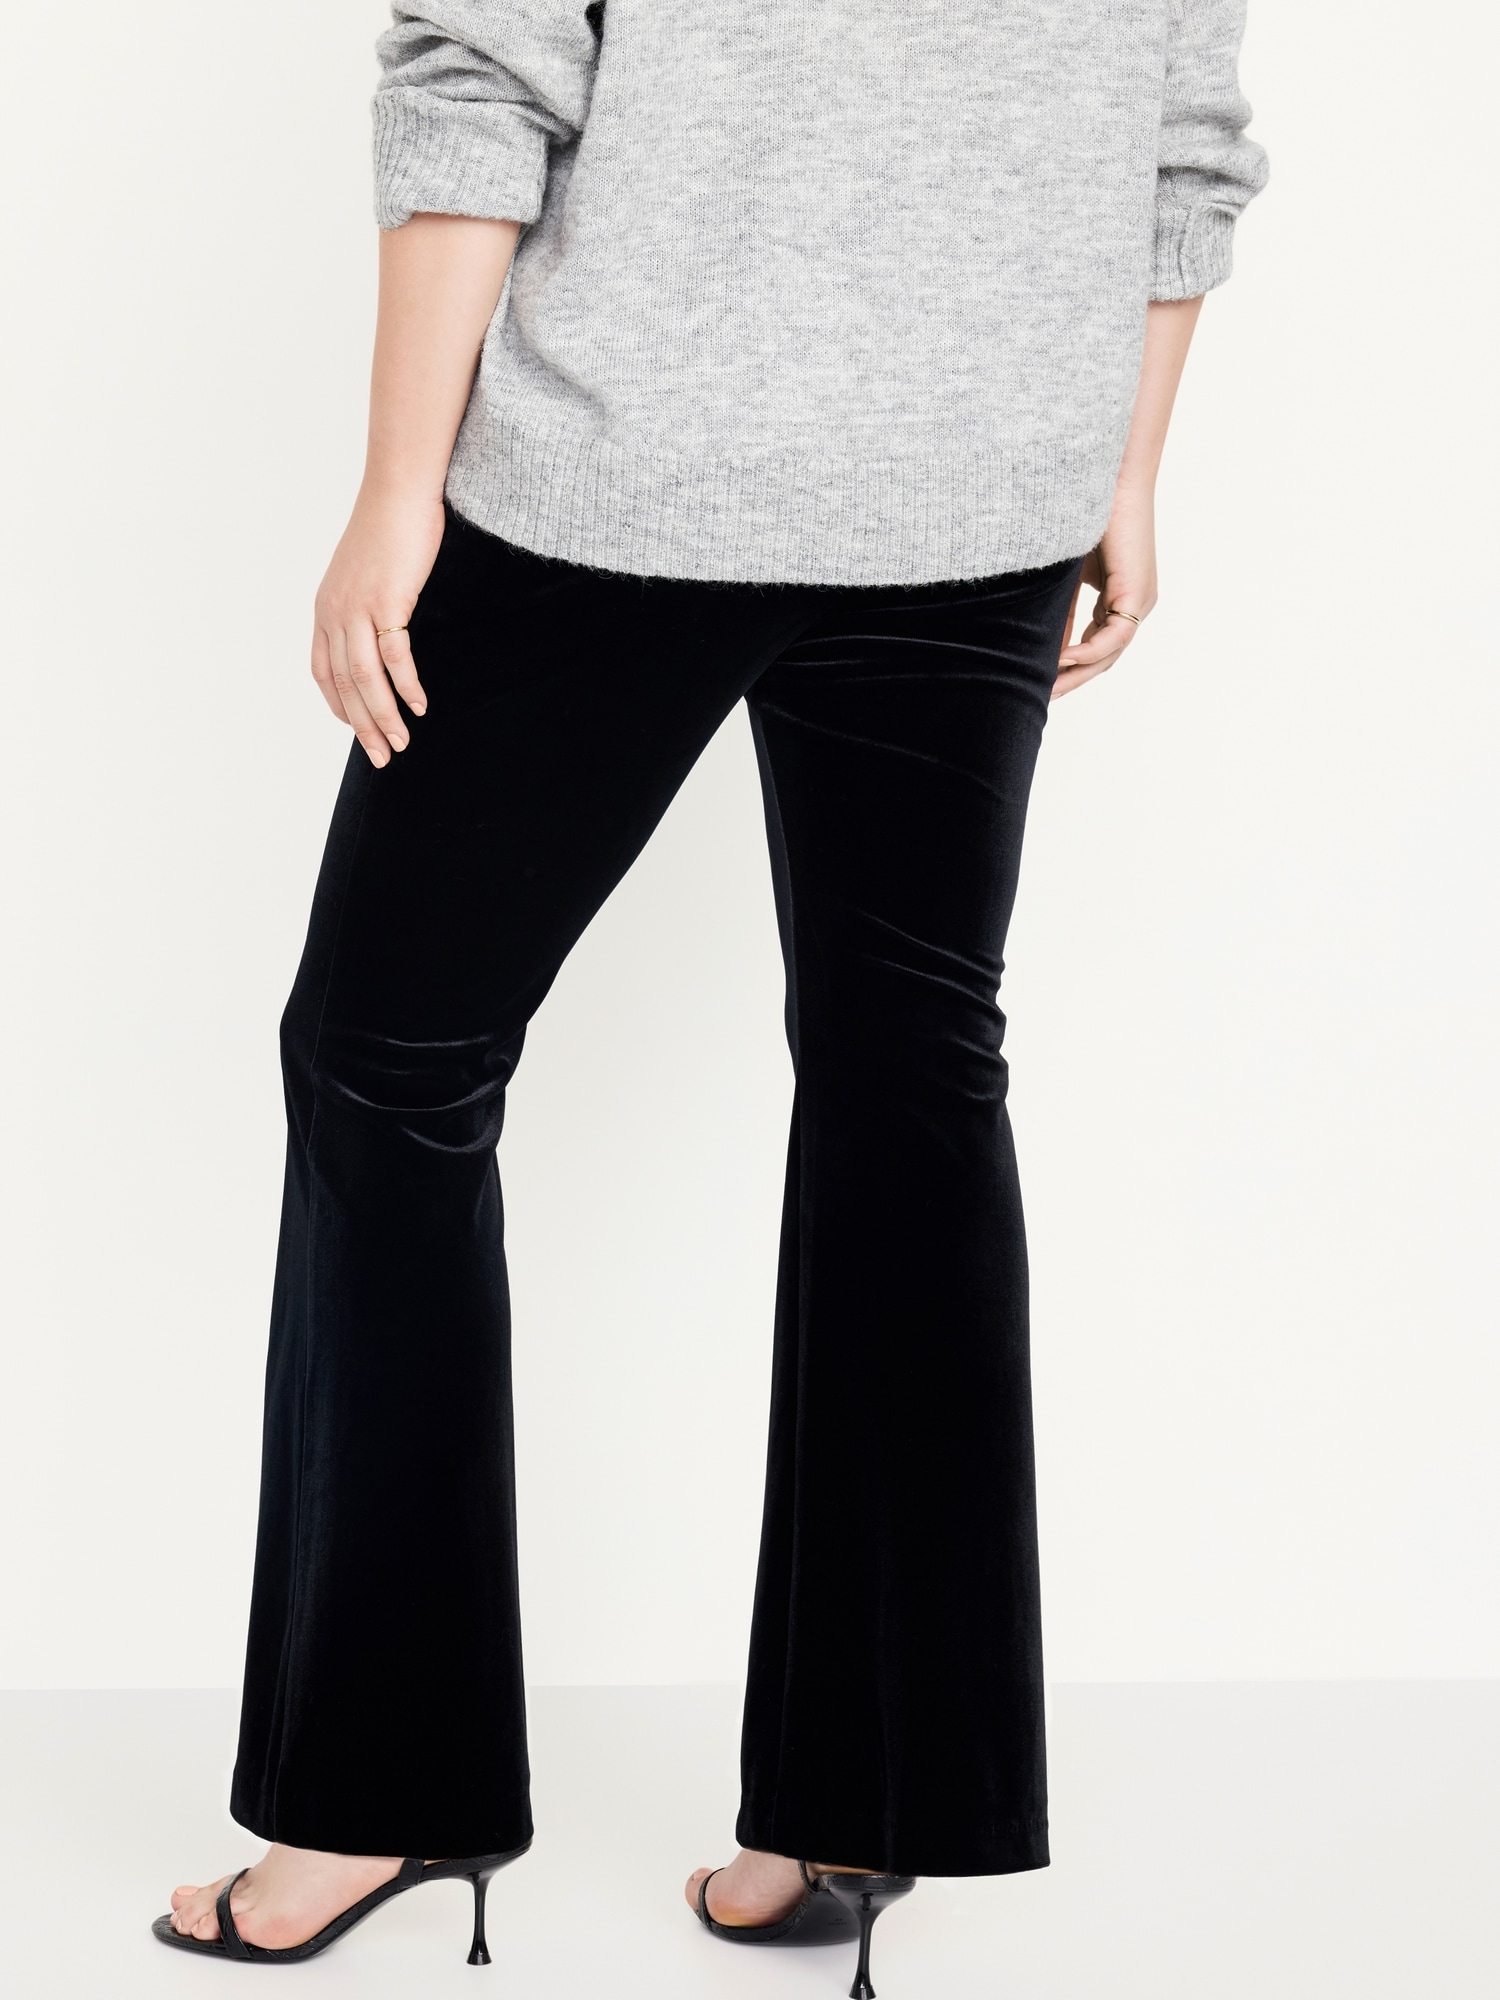 BLACK Crushed velvet high waisted flares | Womens Trousers | Select Fashion